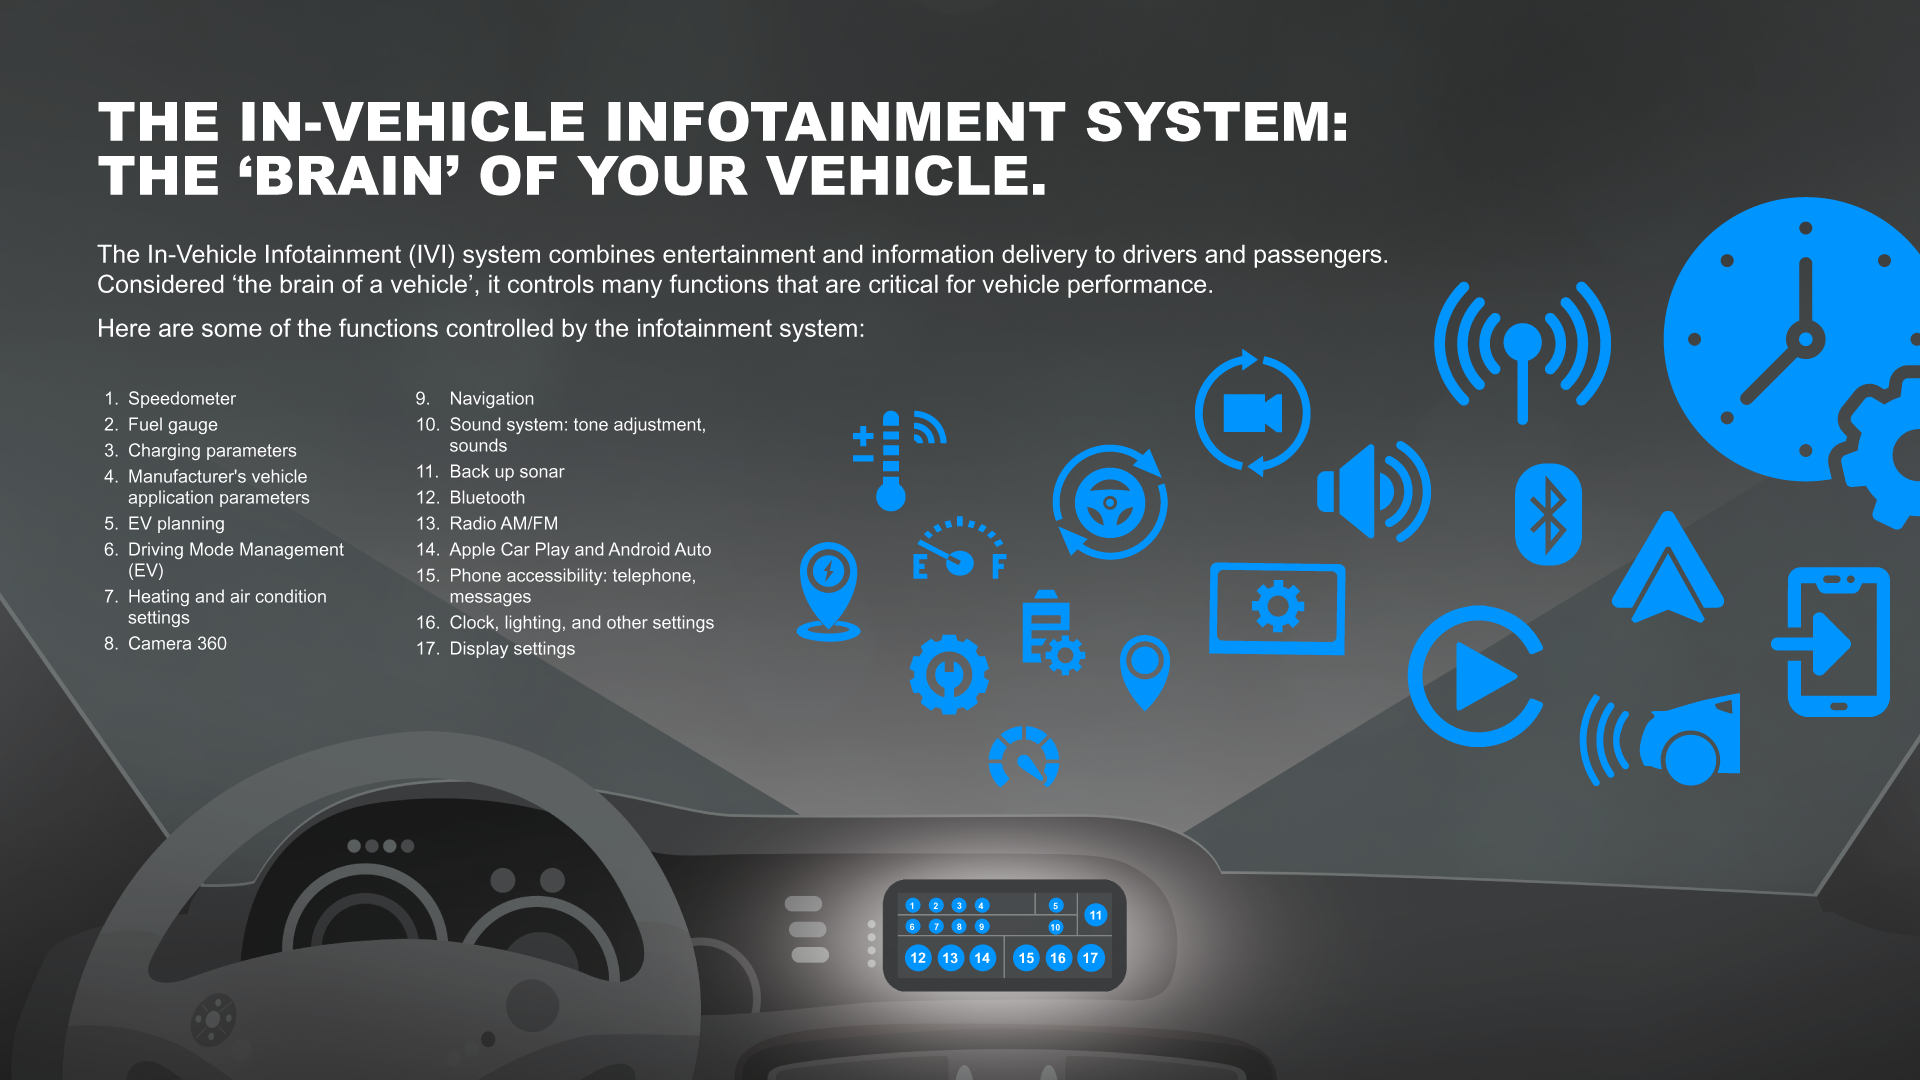 An infographic that lists all the automotive parts that are controlled by the car's infotainment system.